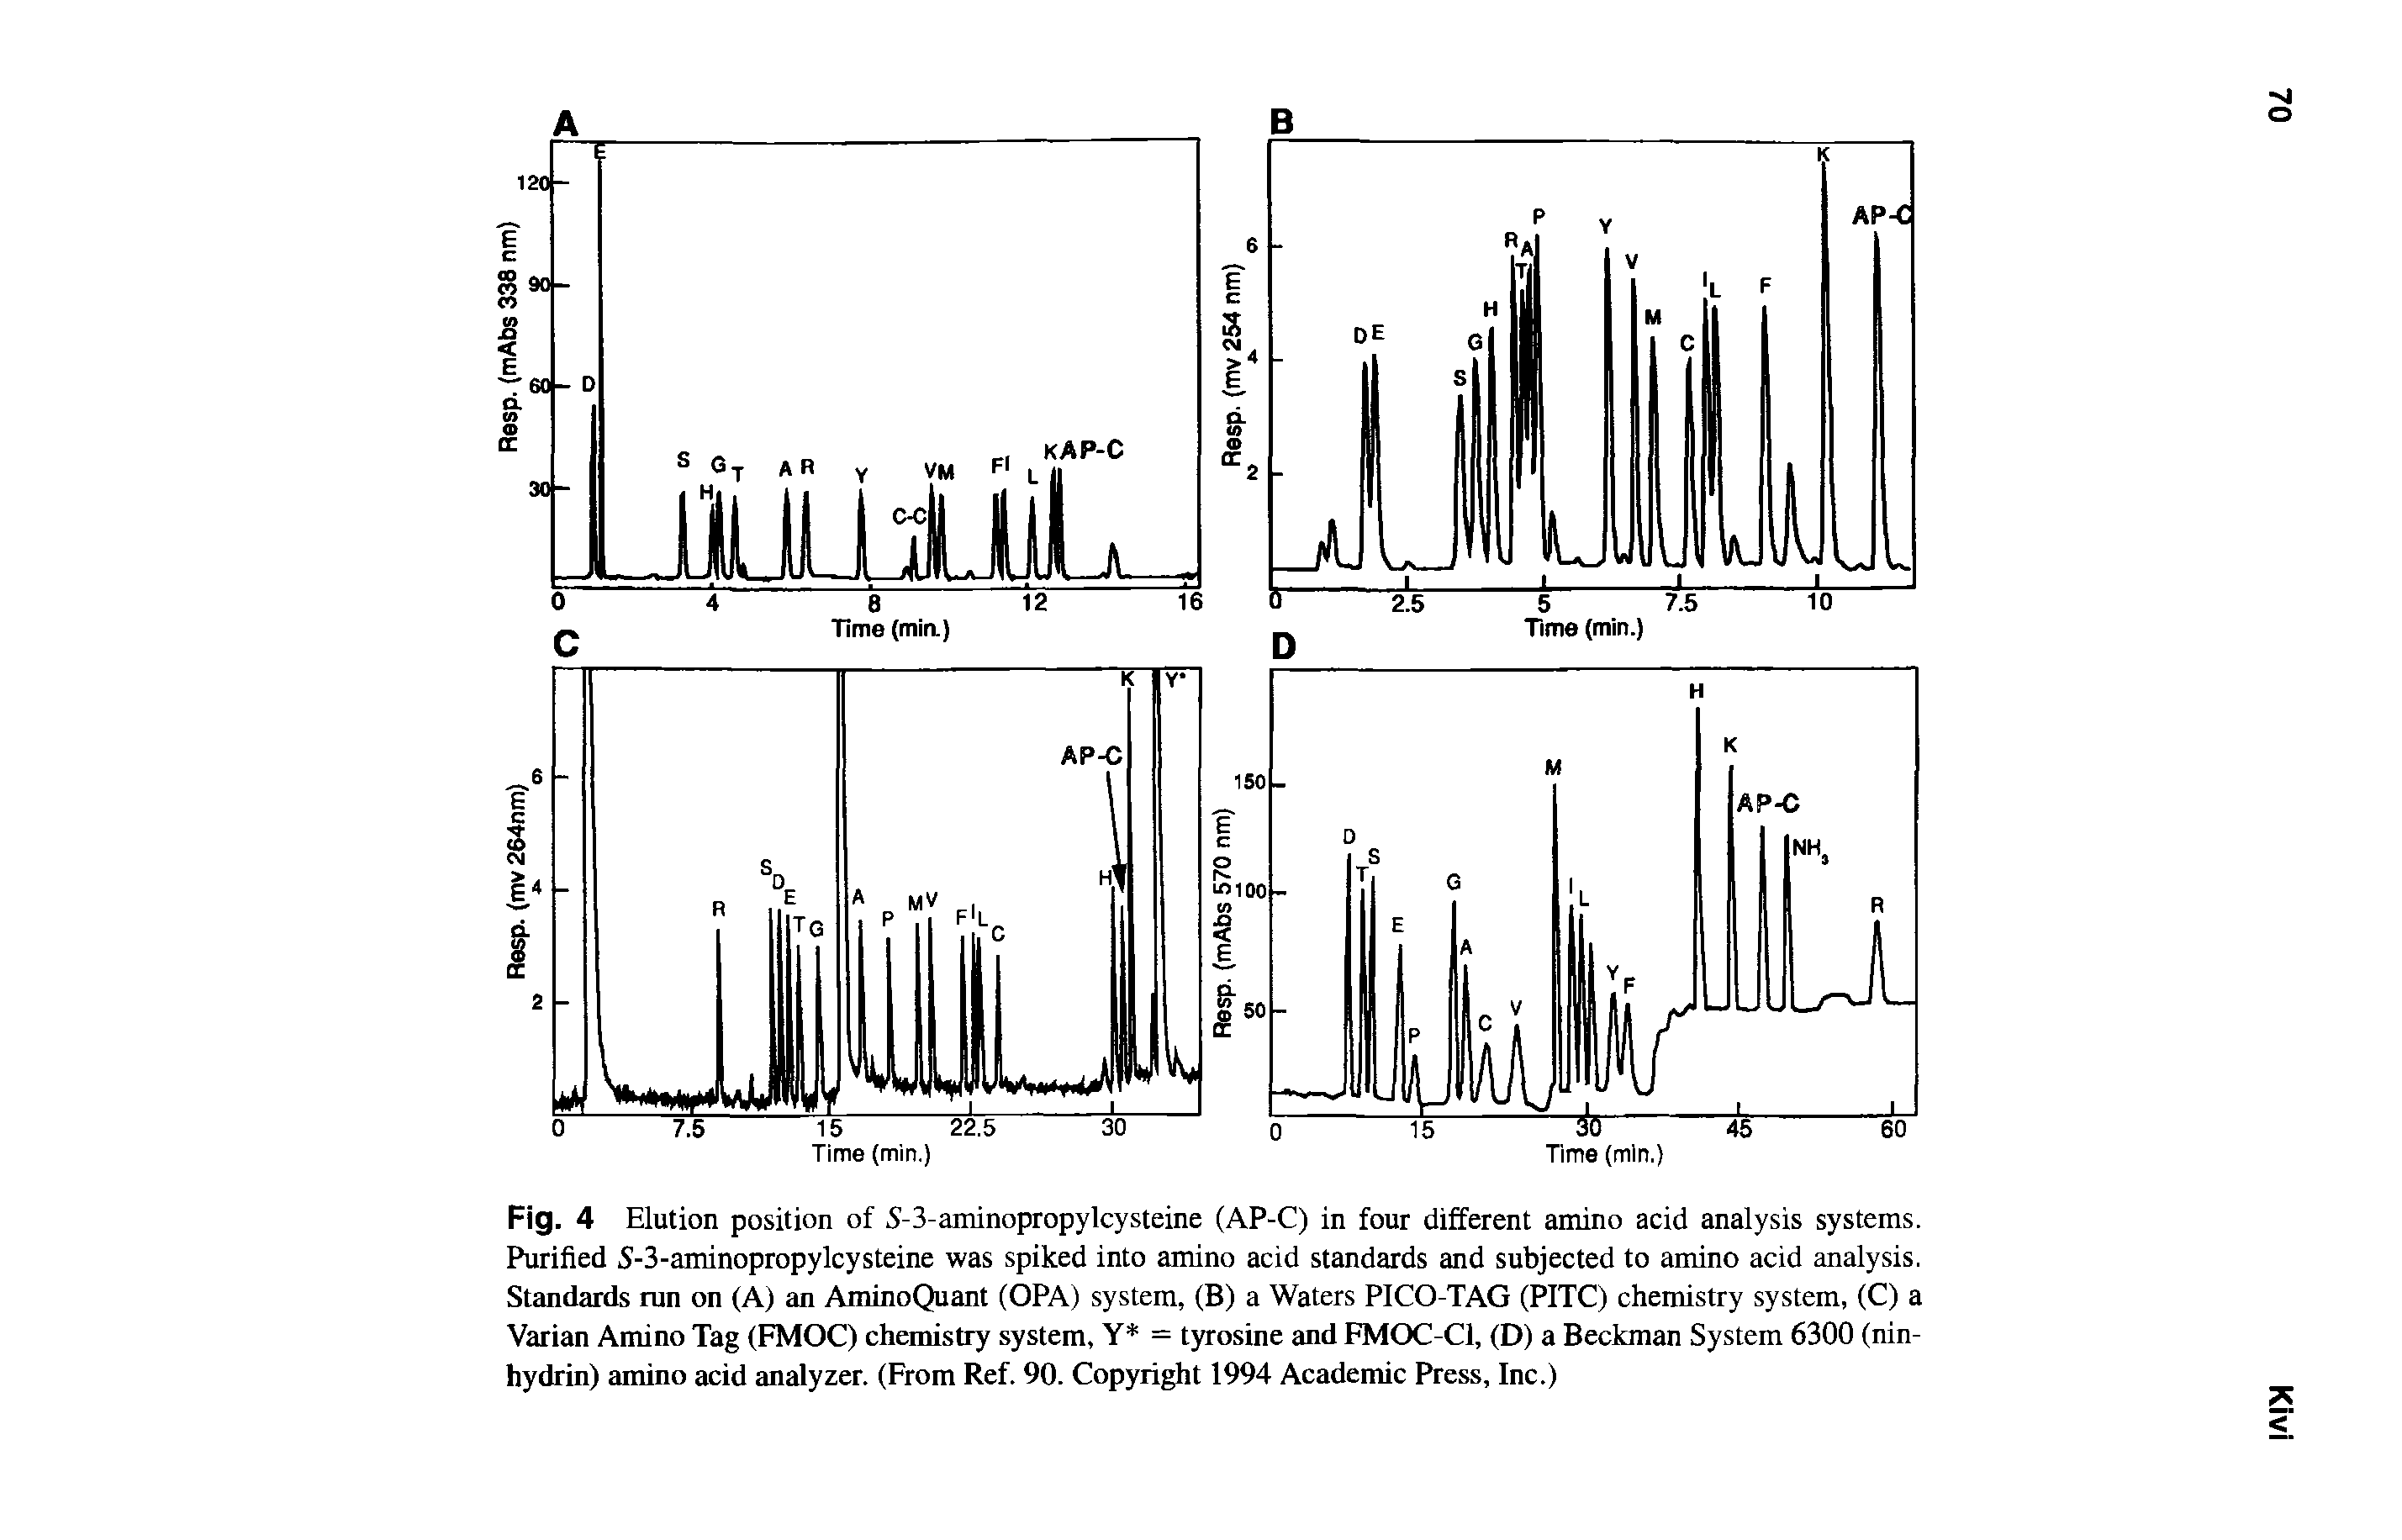 Fig. 4 Elution position of S-3-aminopropylcysteine (AP-C) in four different amino acid analysis systems. Purified 5-3-aminopropylcysteine was spiked into amino acid standards and subjected to amino acid analysis. Standards run on (A) an AminoQuant (OPA) system, (B) a Waters PICO-TAG (PITC) chemistry system, (C) a Varian Amino Tag (FMOC) chemistry system, Y = tyrosine and FMOC-Cl, (D) a Beckman System 6300 (nin-hydrin) amino acid analyzer. (From Ref. 90. Copyright 1994 Academic Press, Inc.)...